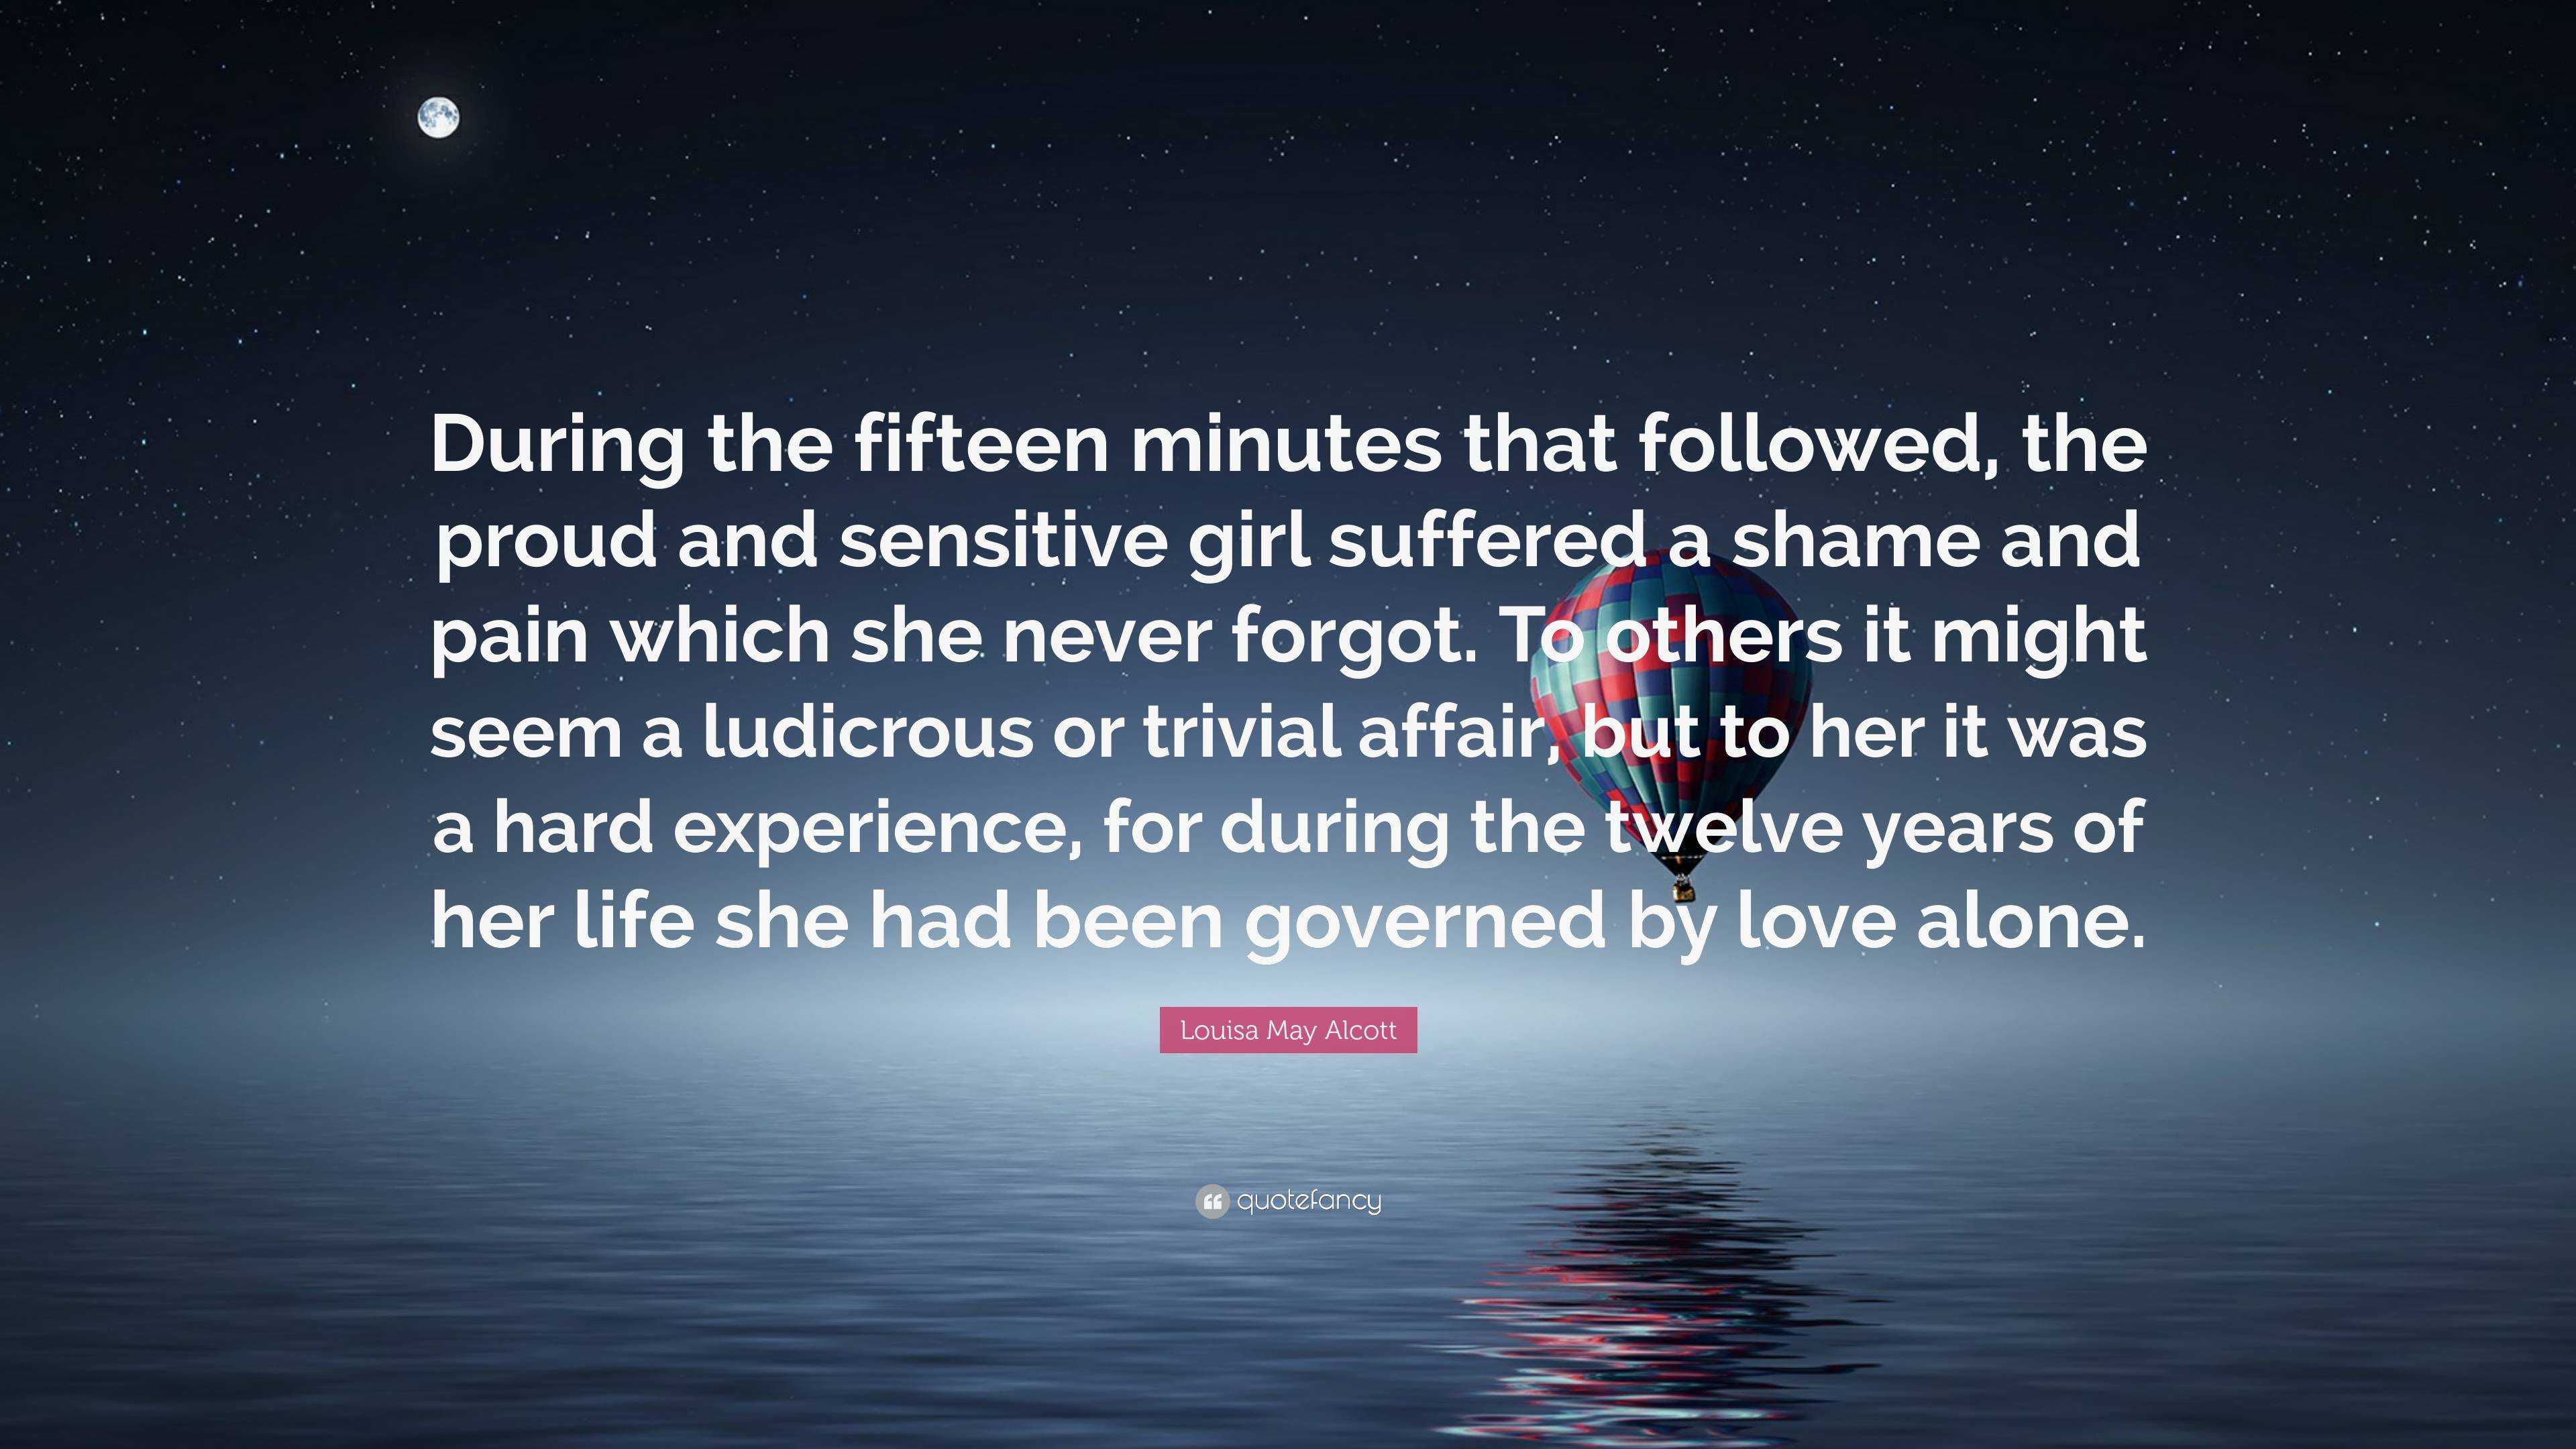 Louisa May Alcott Quote: “During the fifteen minutes that followed, the ...